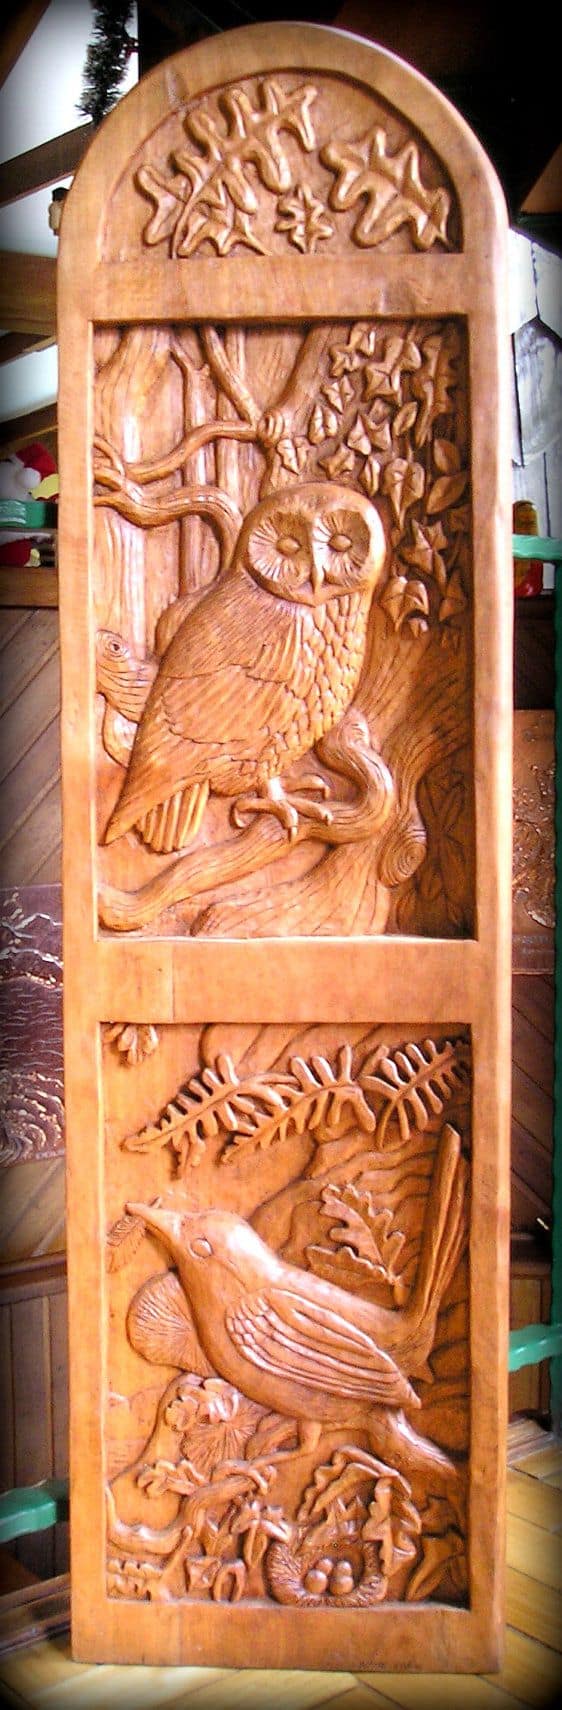 20 Wood Carving Ideas For a Rustic Home Decor (5)